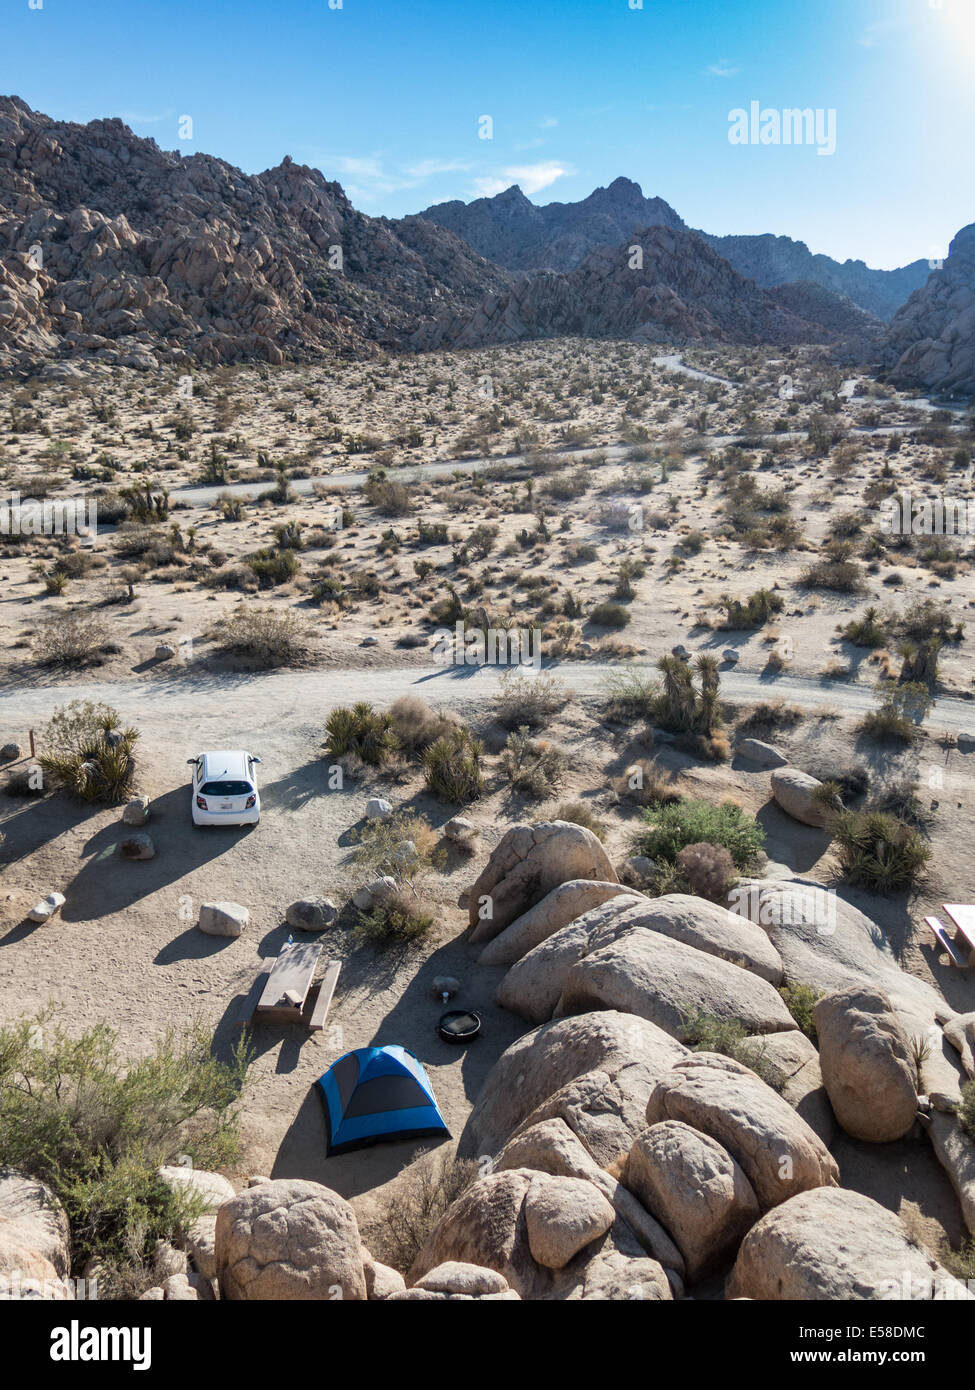 A spartan campsite in the Joshua Tree National Park Stock Photo